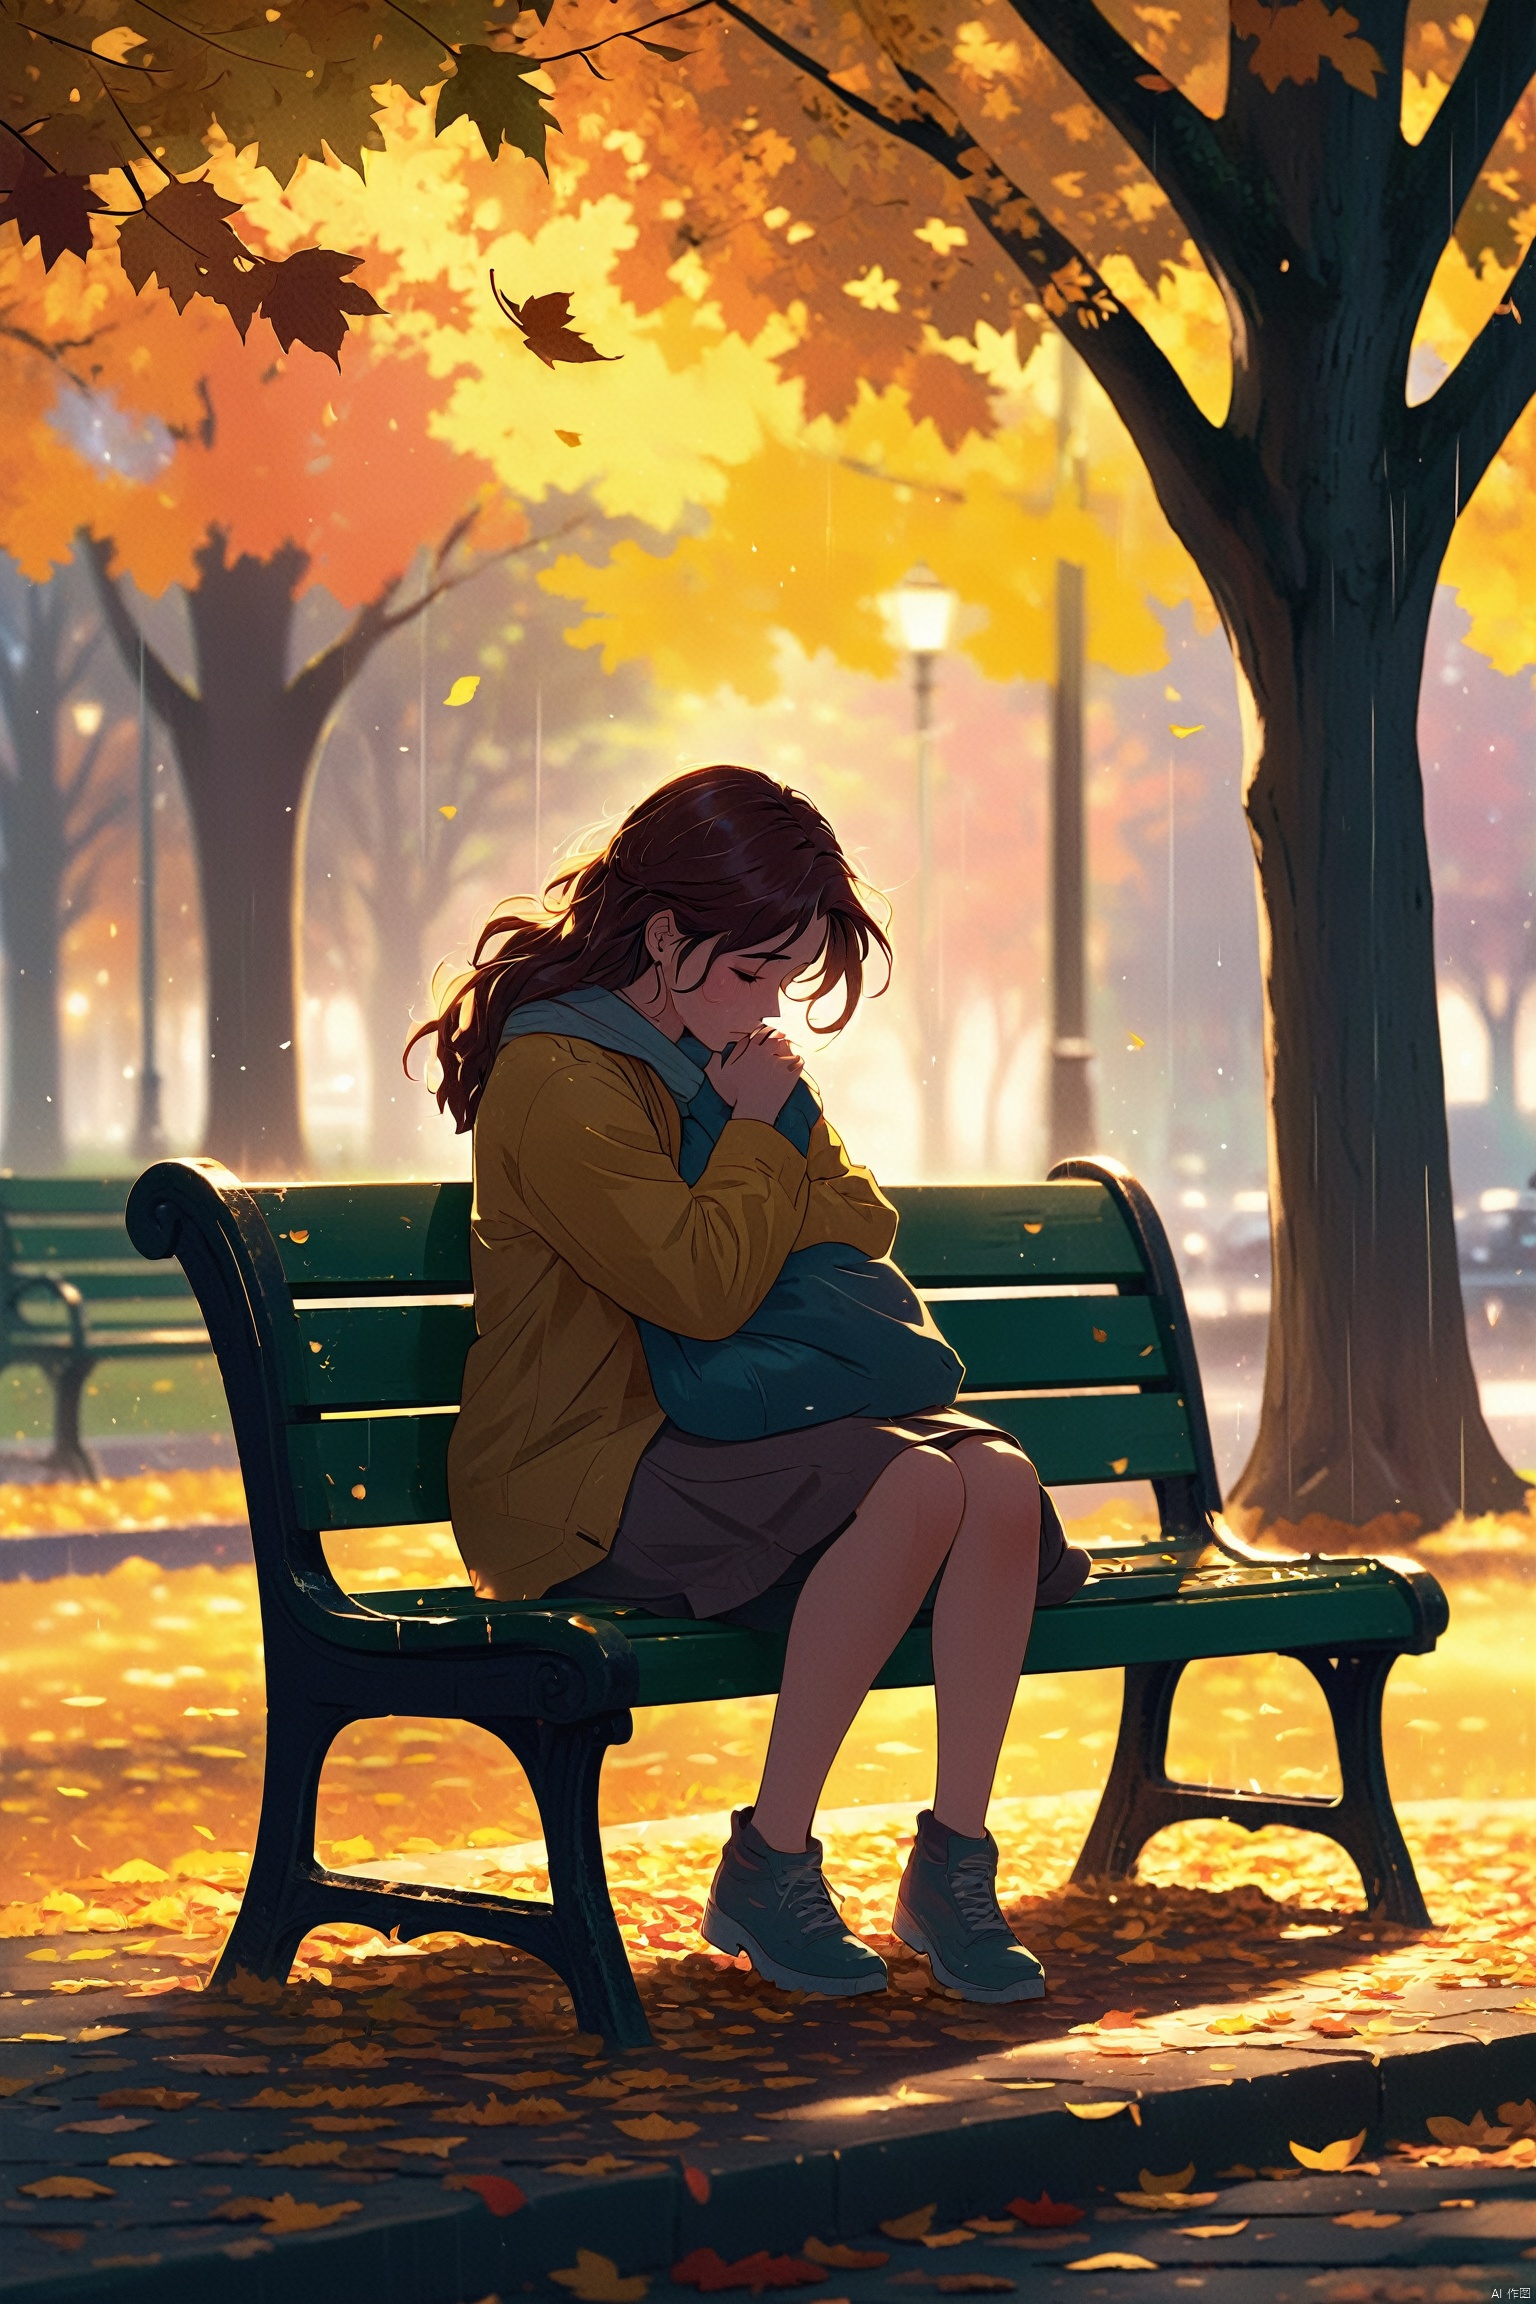 On a park bench, a young woman curls up, hugging her knees, with tears streaking her cheeks. The surrounding trees sway in the wind, and the fallen leaves appear particularly vibrant after the rain. Her silhouette on the bench is exceptionally lonely, as if the world is keeping its distance from her.